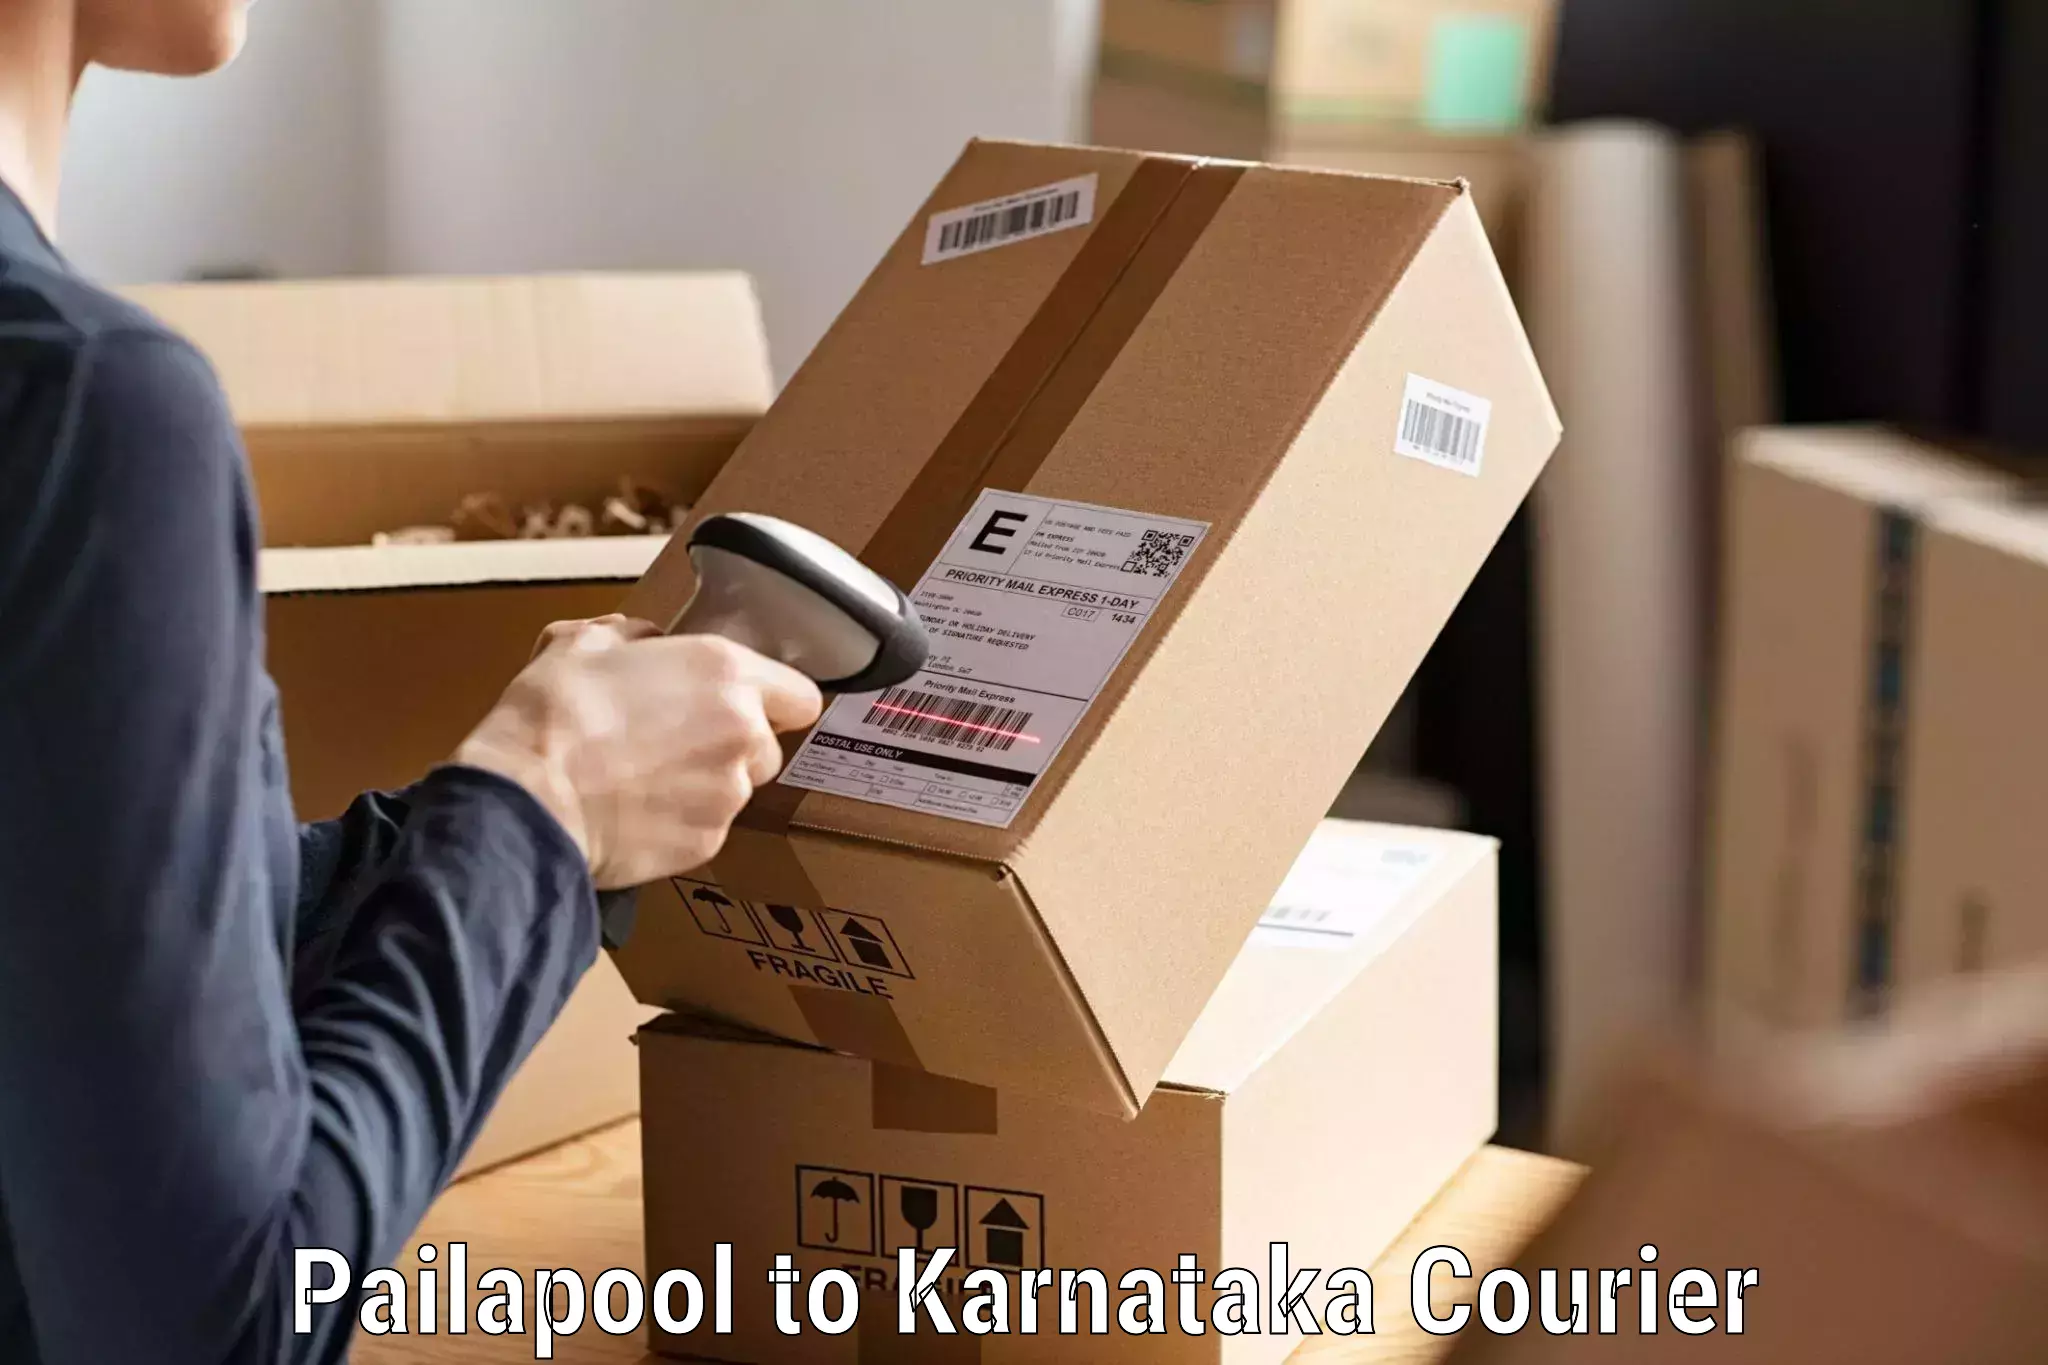 Local delivery service Pailapool to Thirthahalli